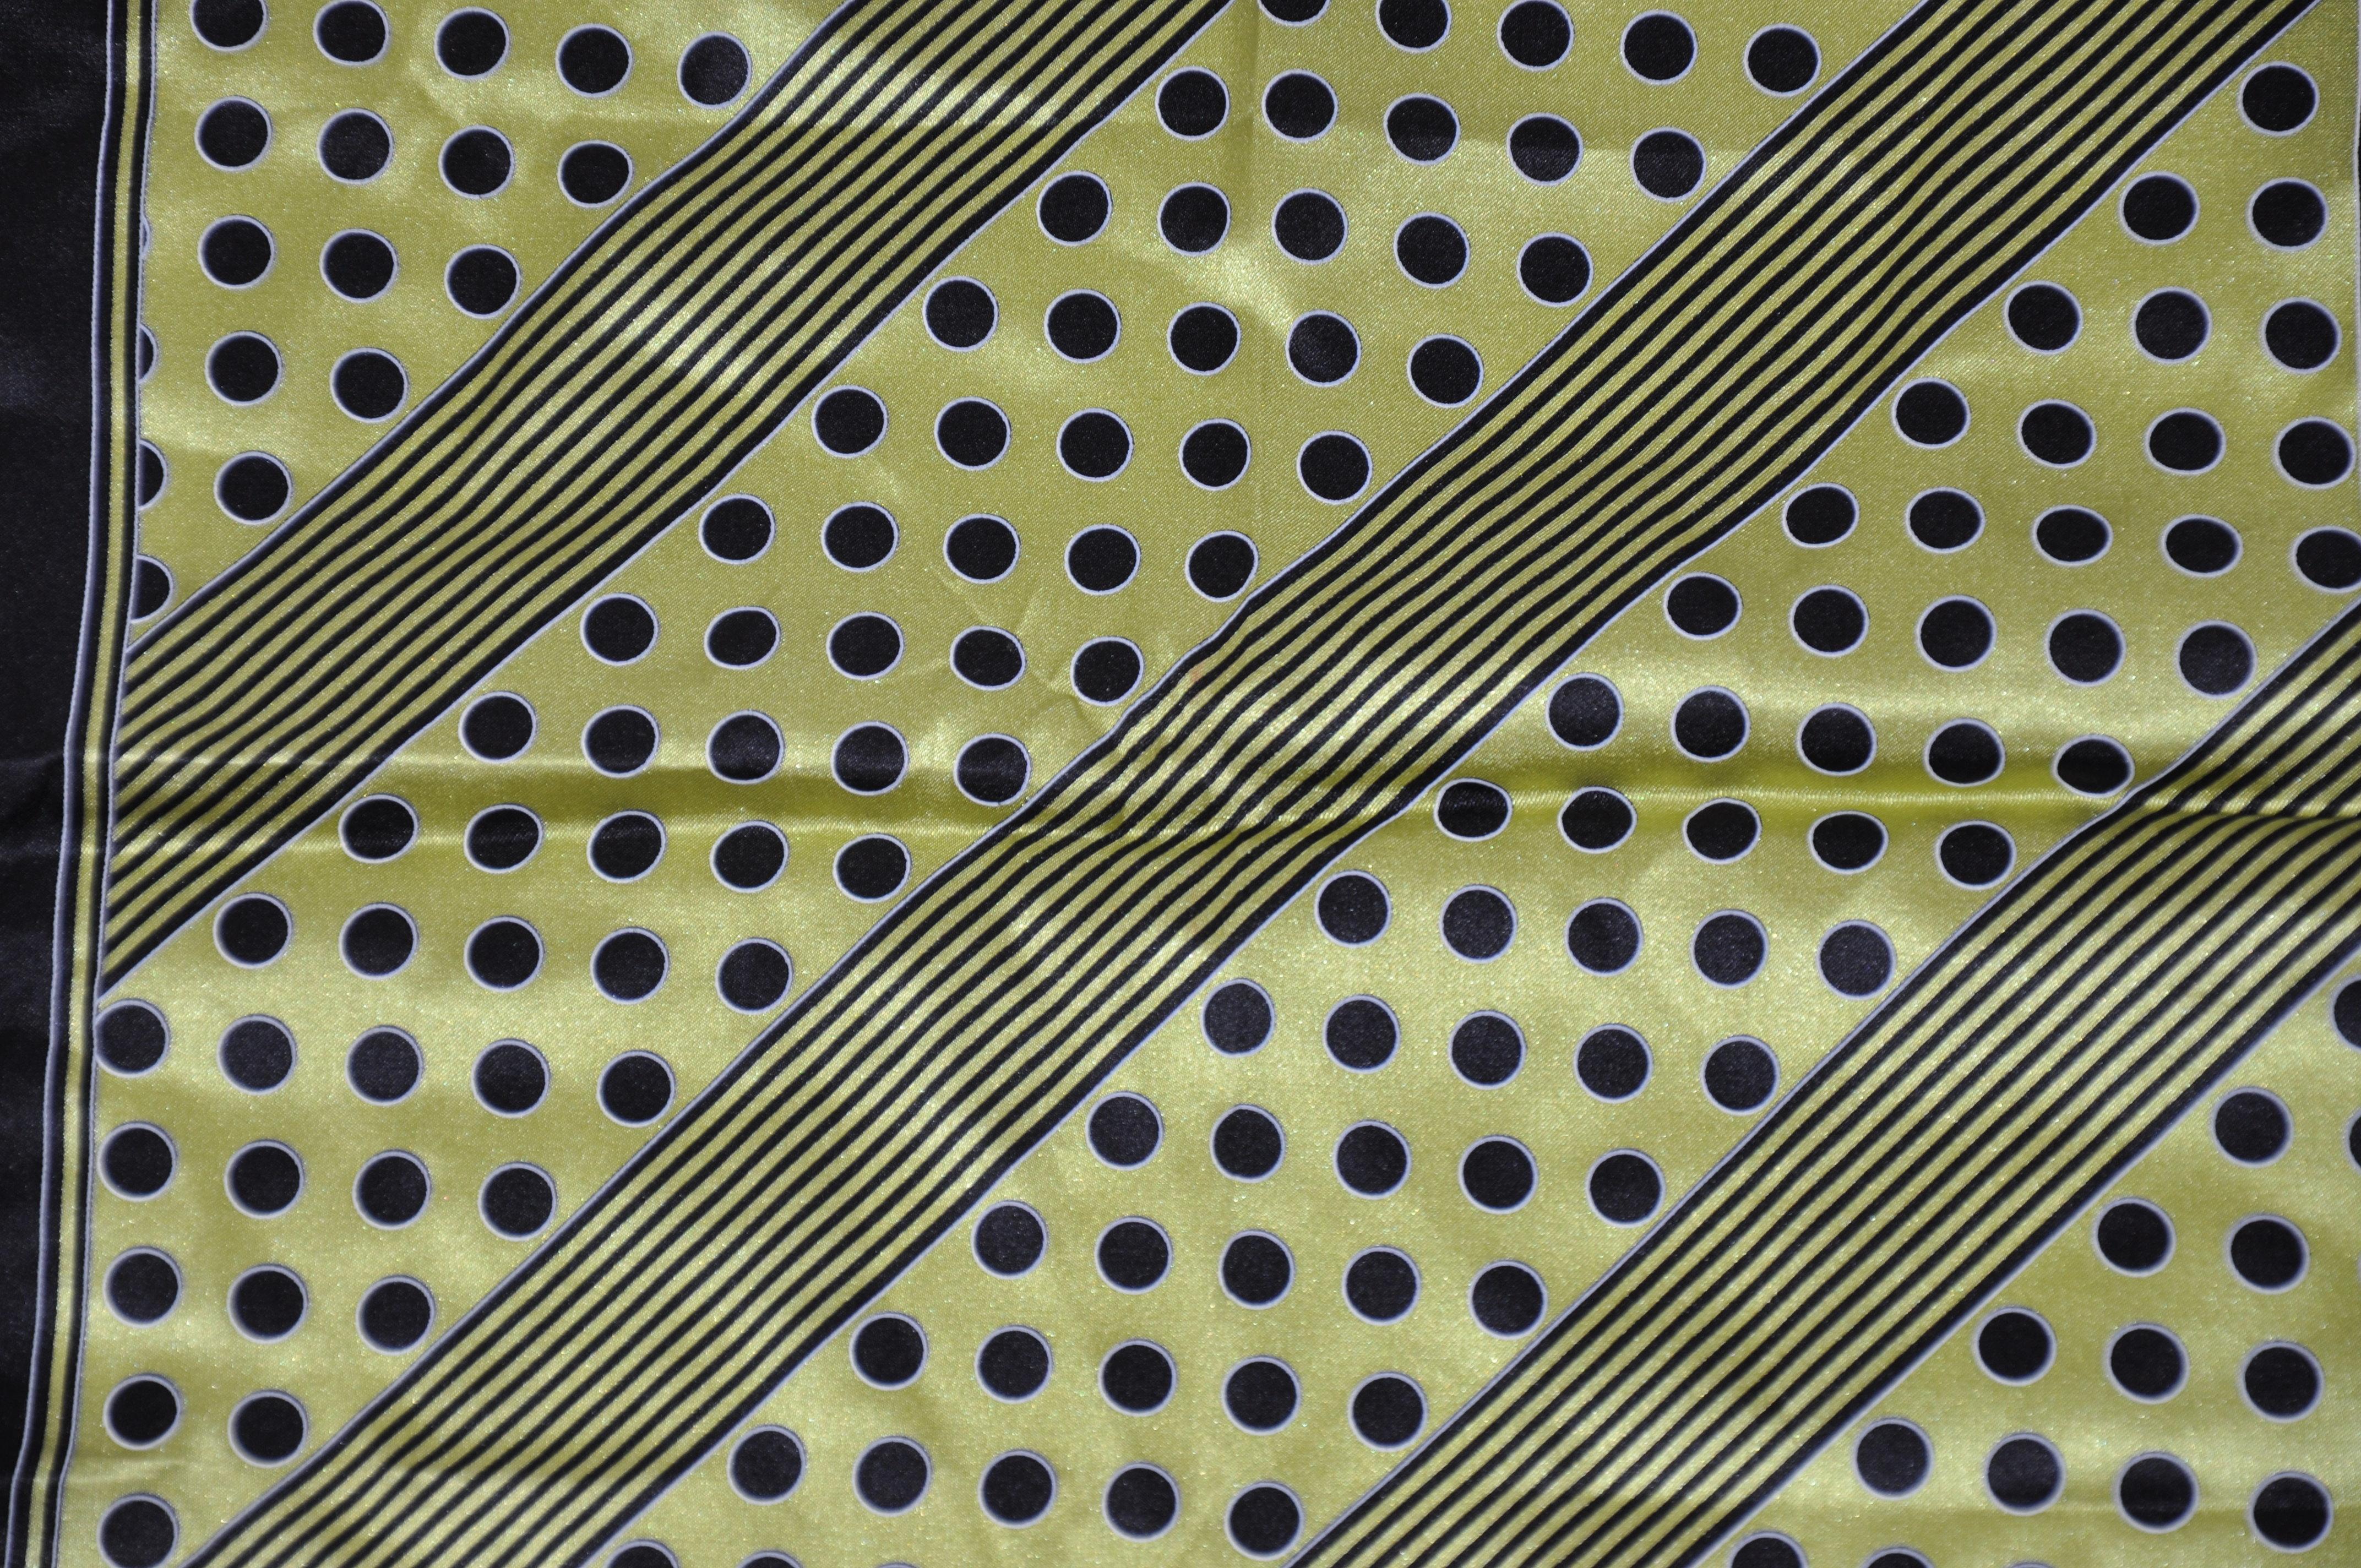 Majestic Olive Green & Black Polka Dots and Stripes Silk Handkerchief In Good Condition For Sale In New York, NY